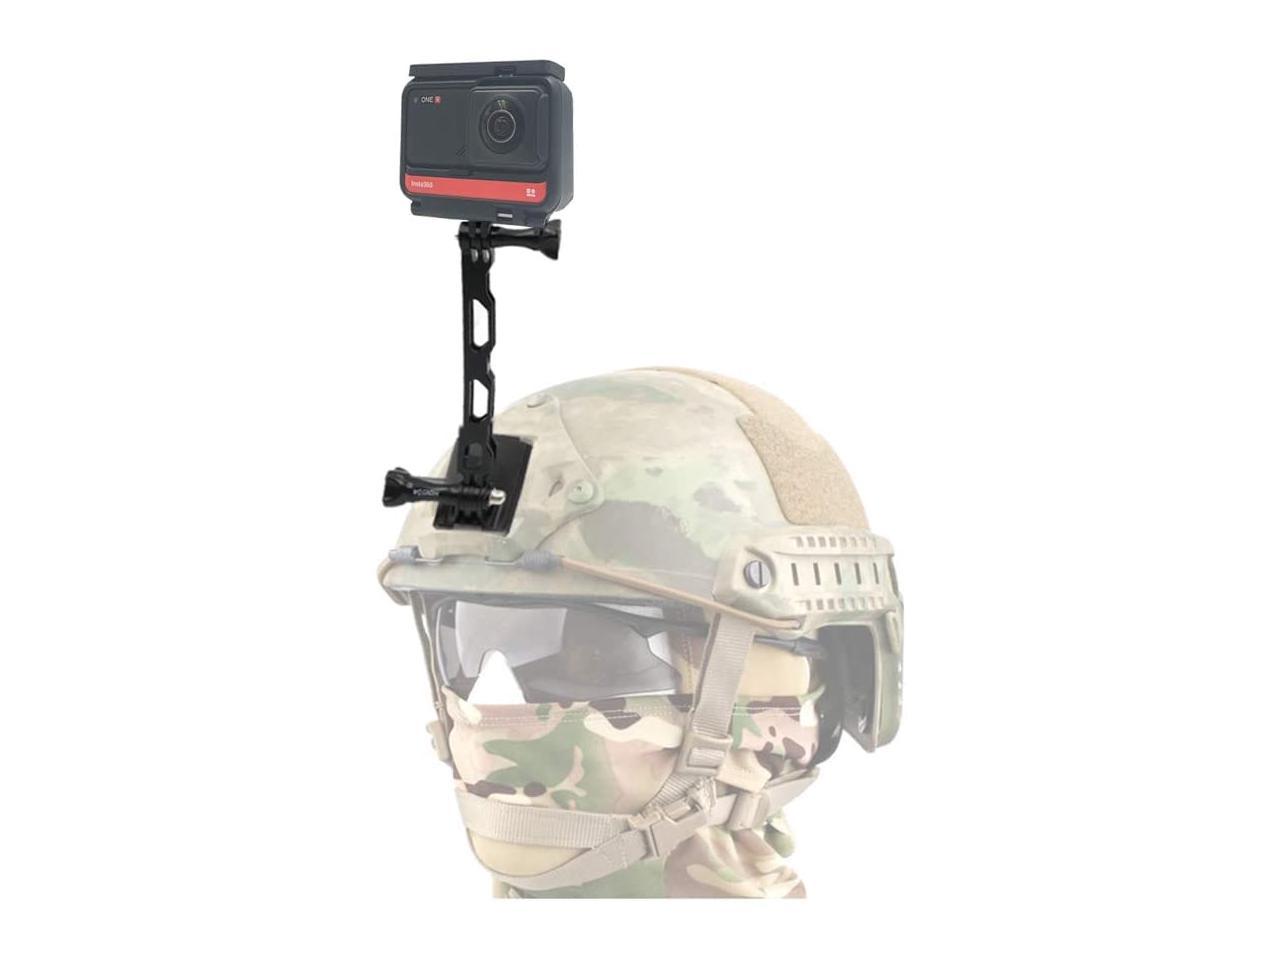 Tactical Nvg Helmet Mount For Insta360 One R Gopro Hero 8 Gopro Max And Other Action Cameras Newegg Com